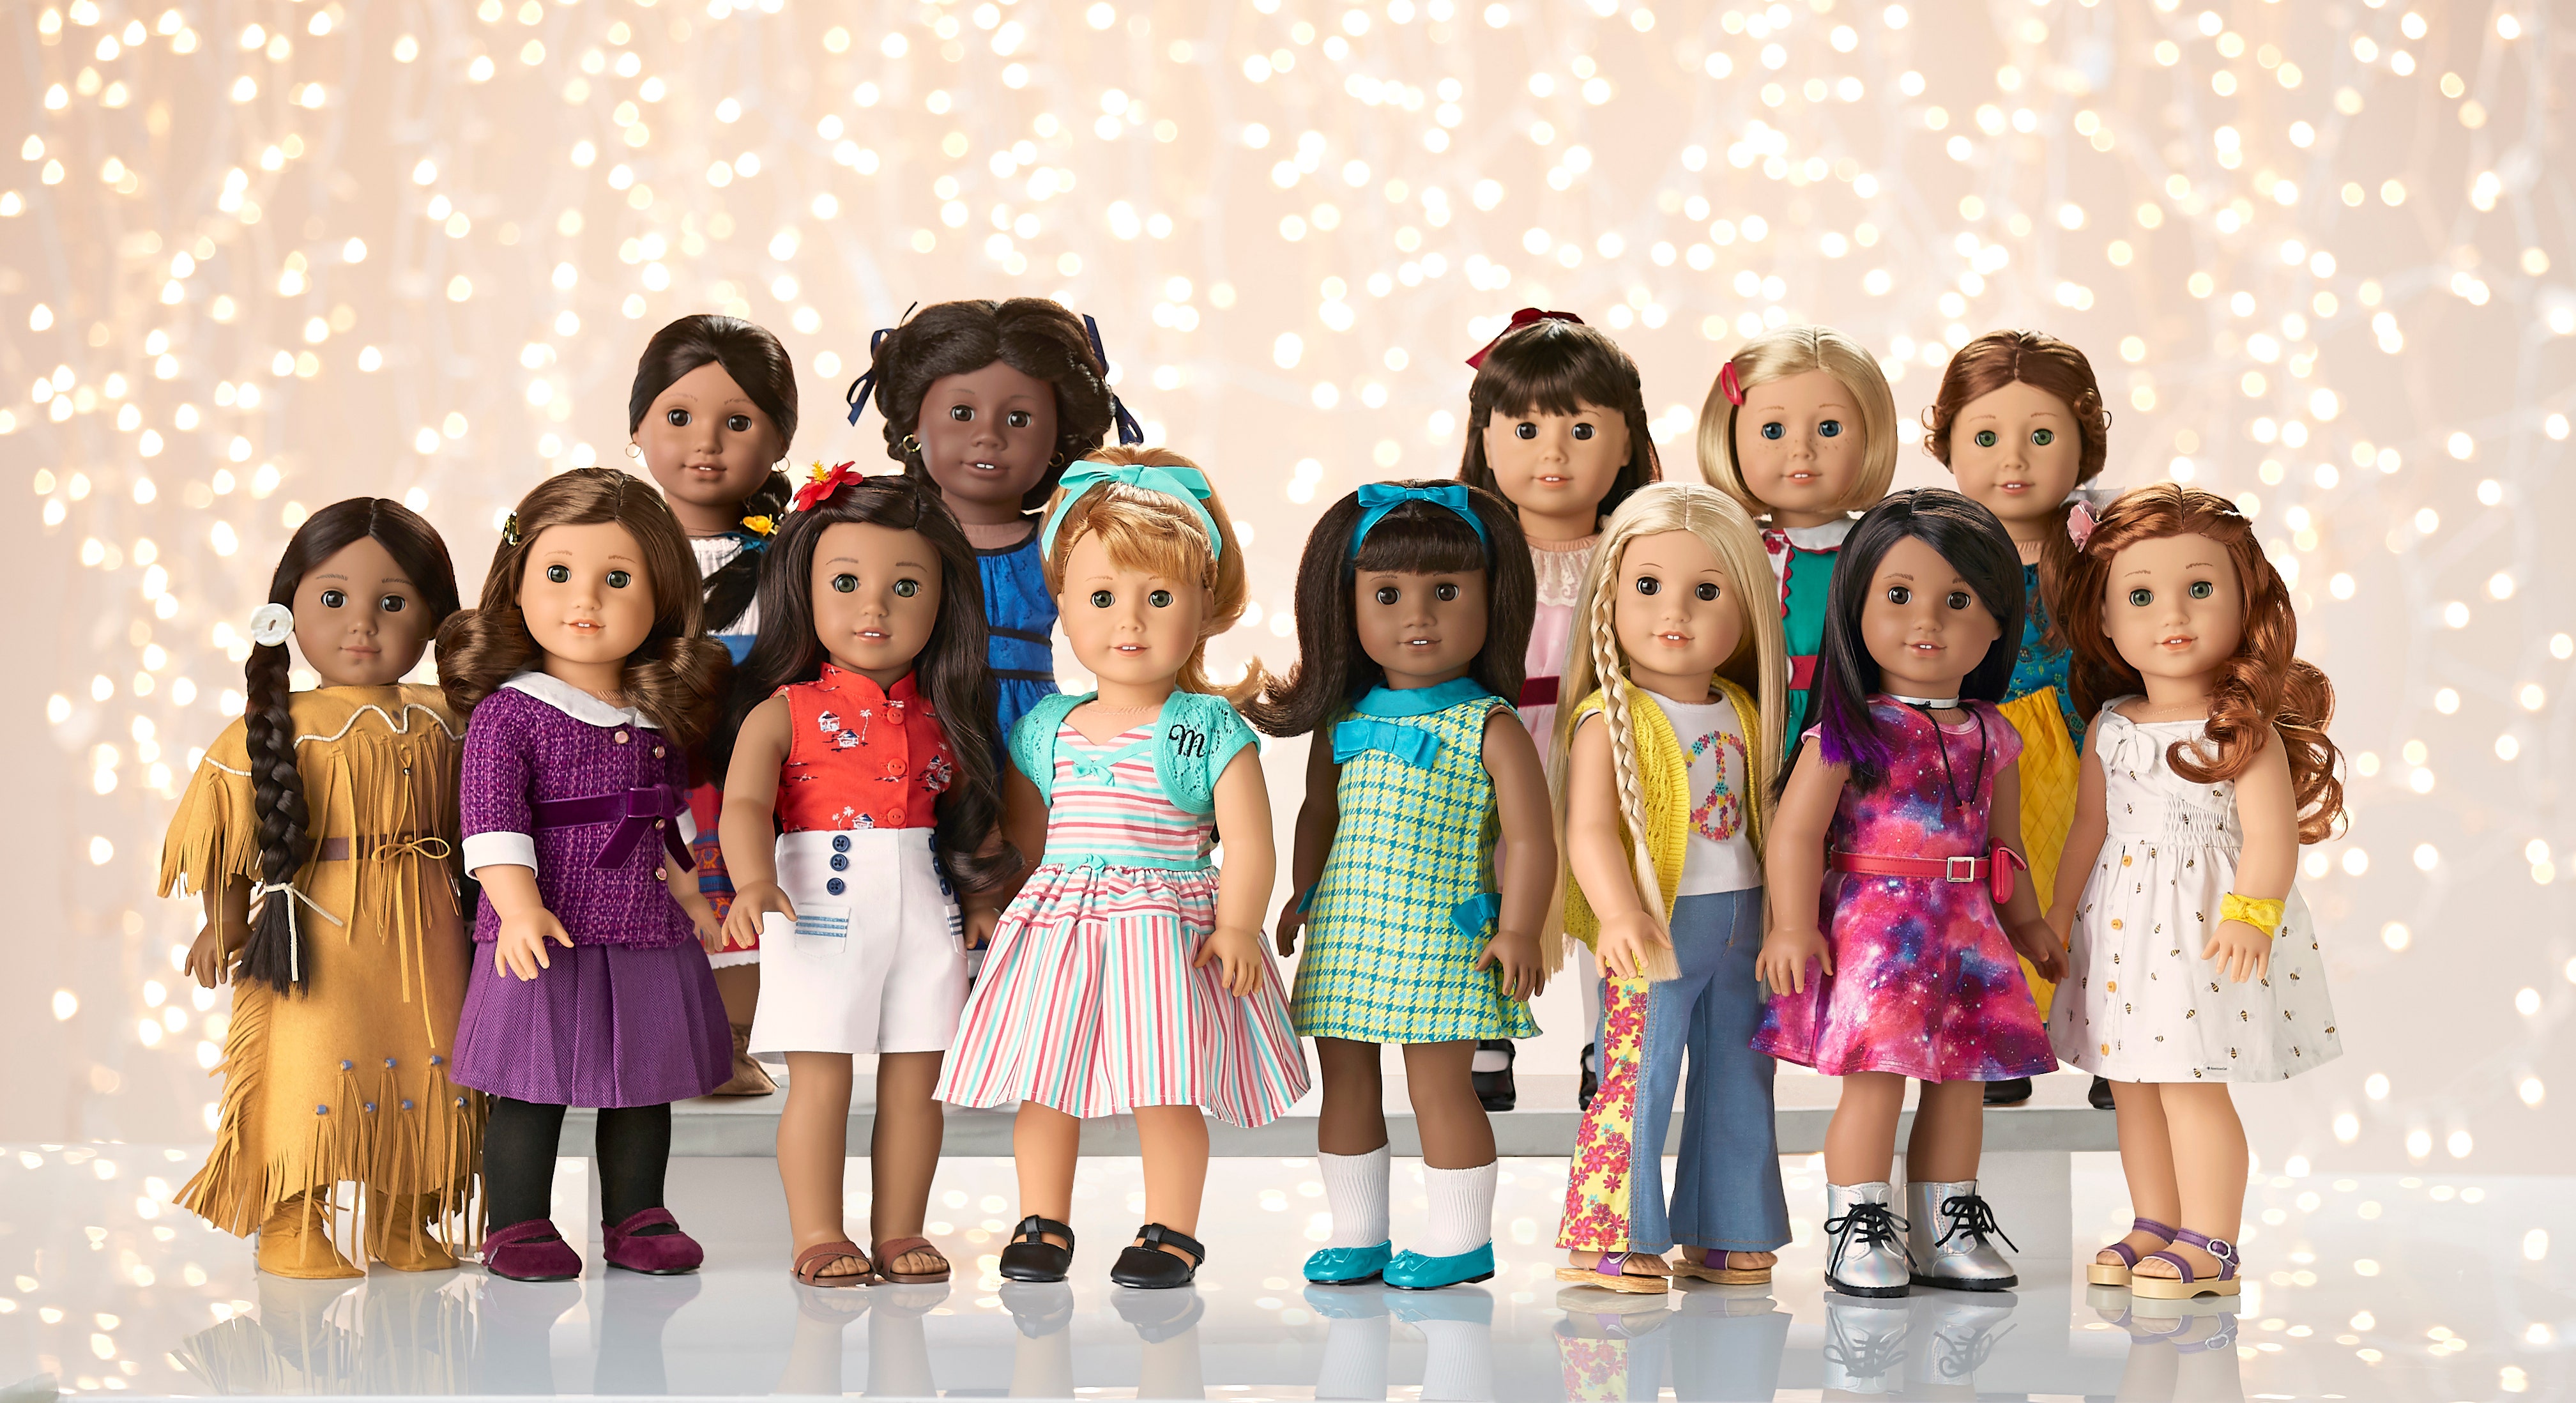 American Girl releases $5,000 holiday doll covered in Swarovski crystals